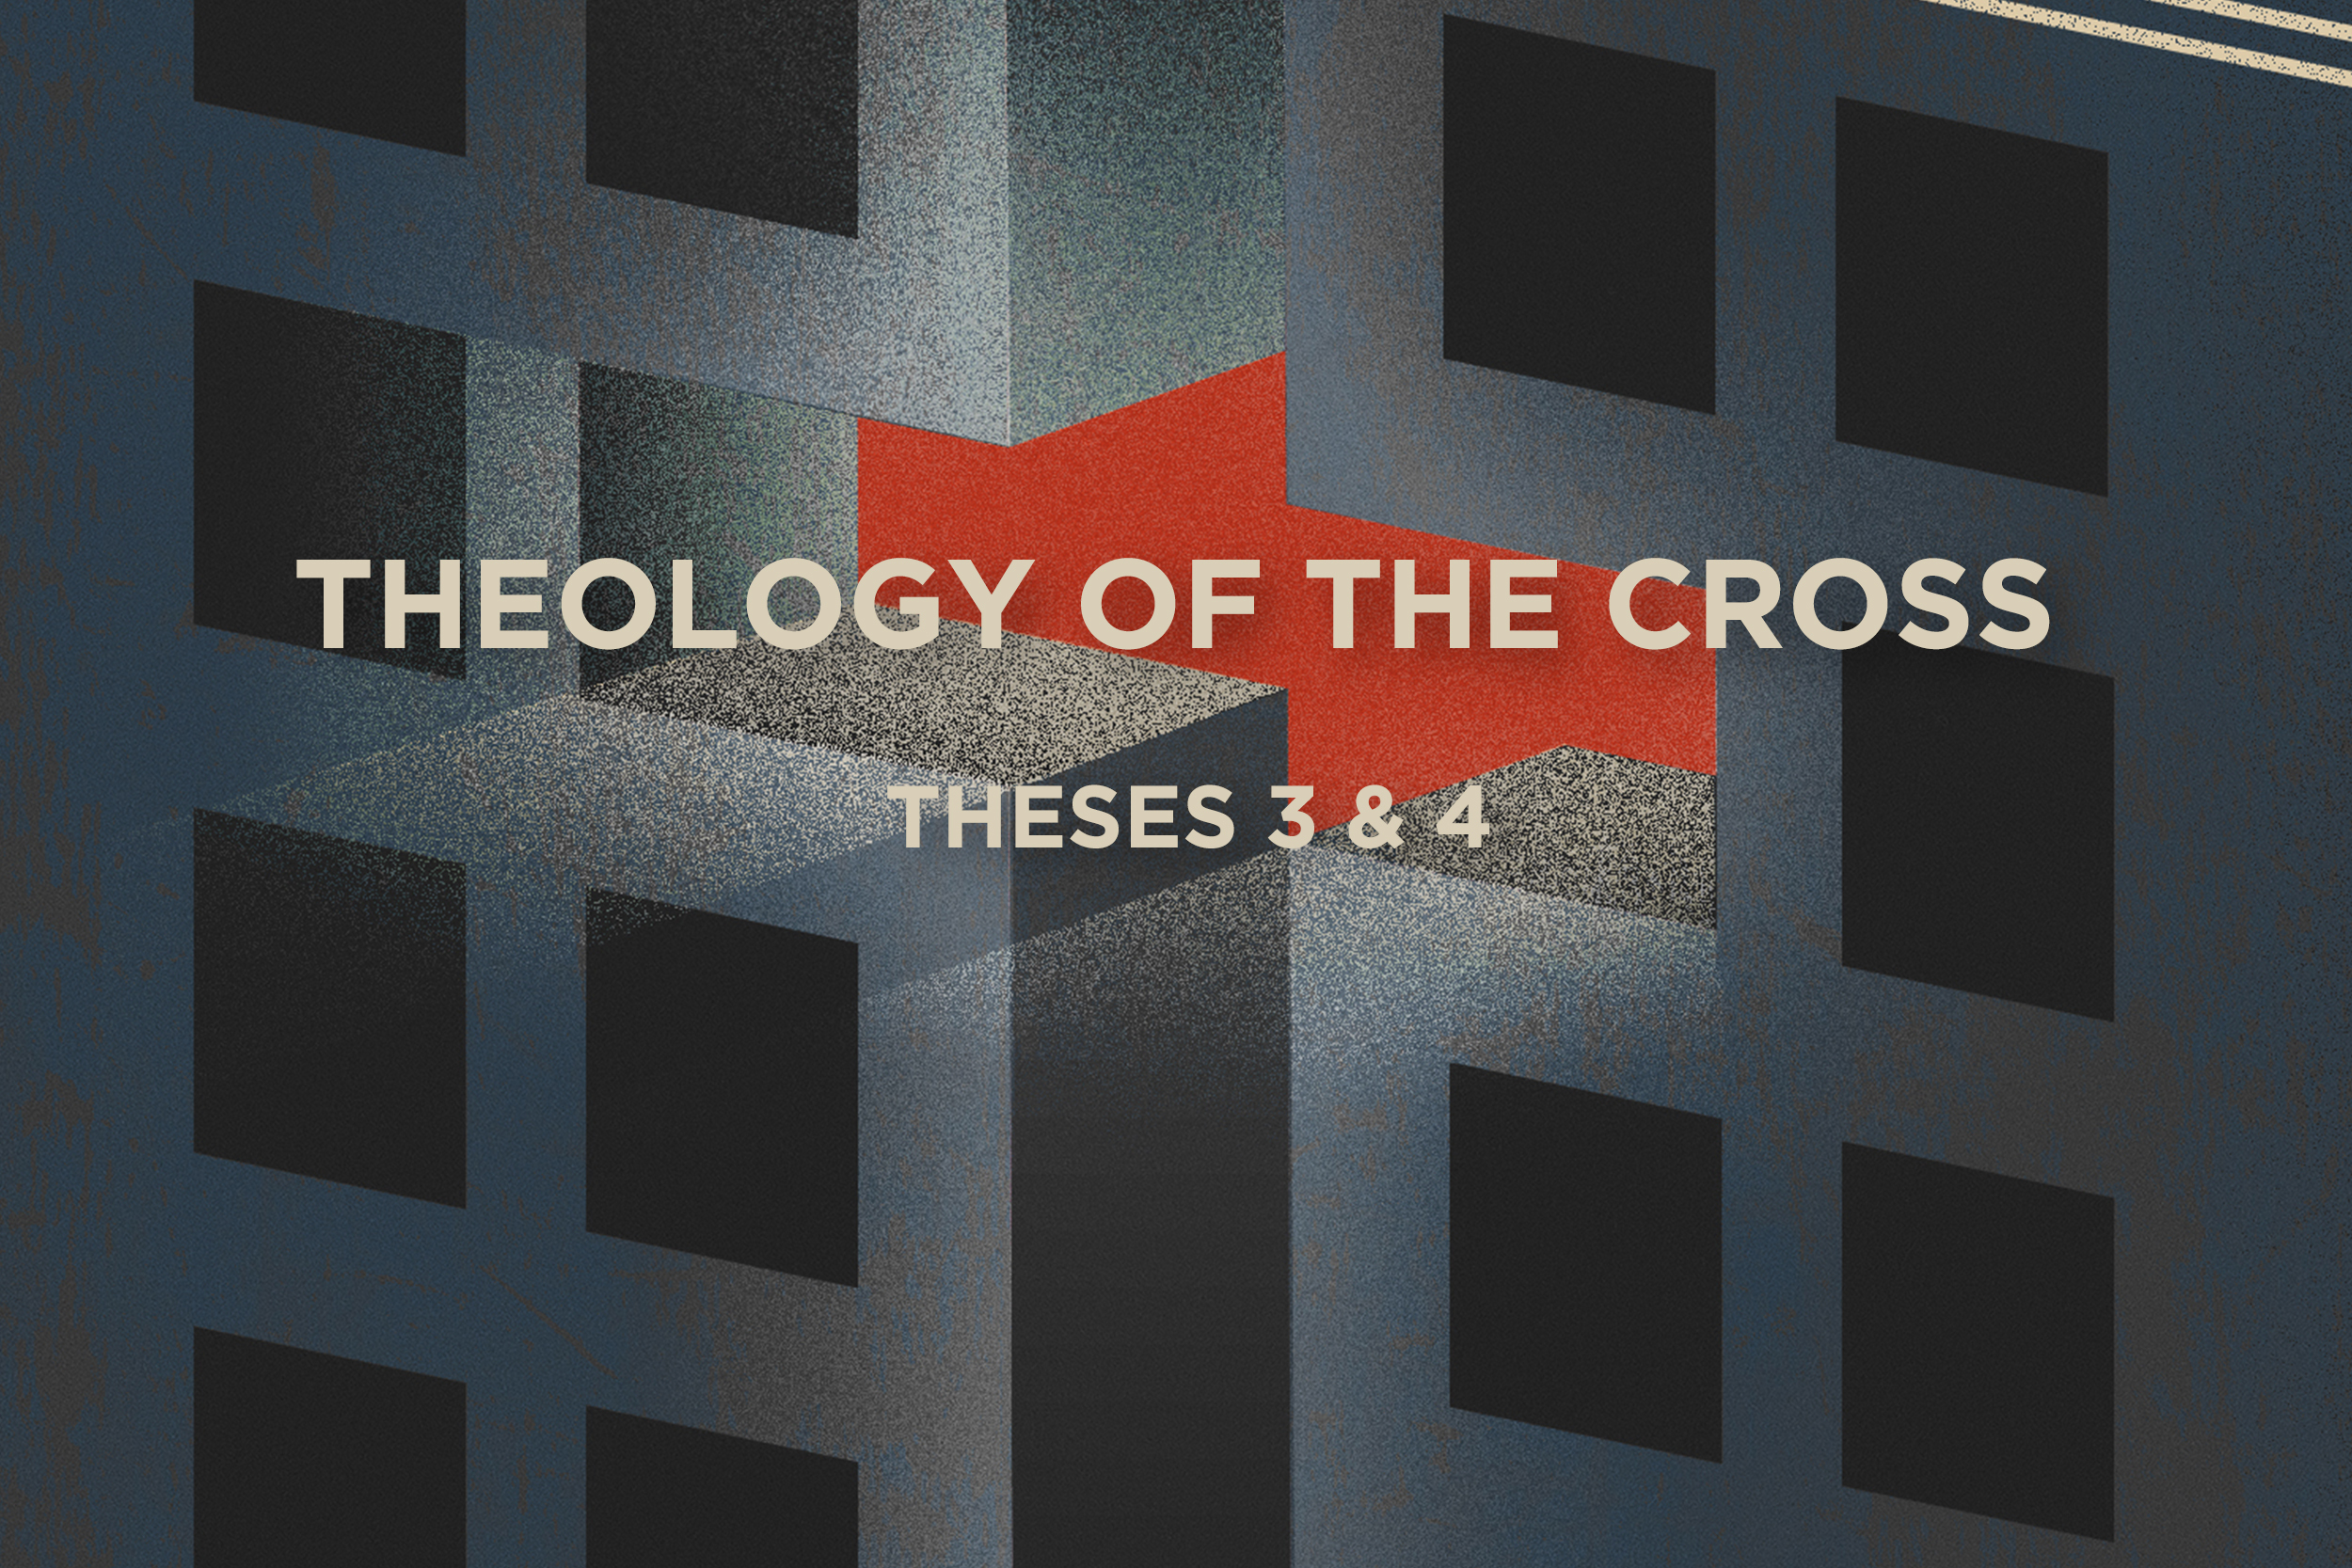 Theses 3 & 4: The Inverted Way of Jesus